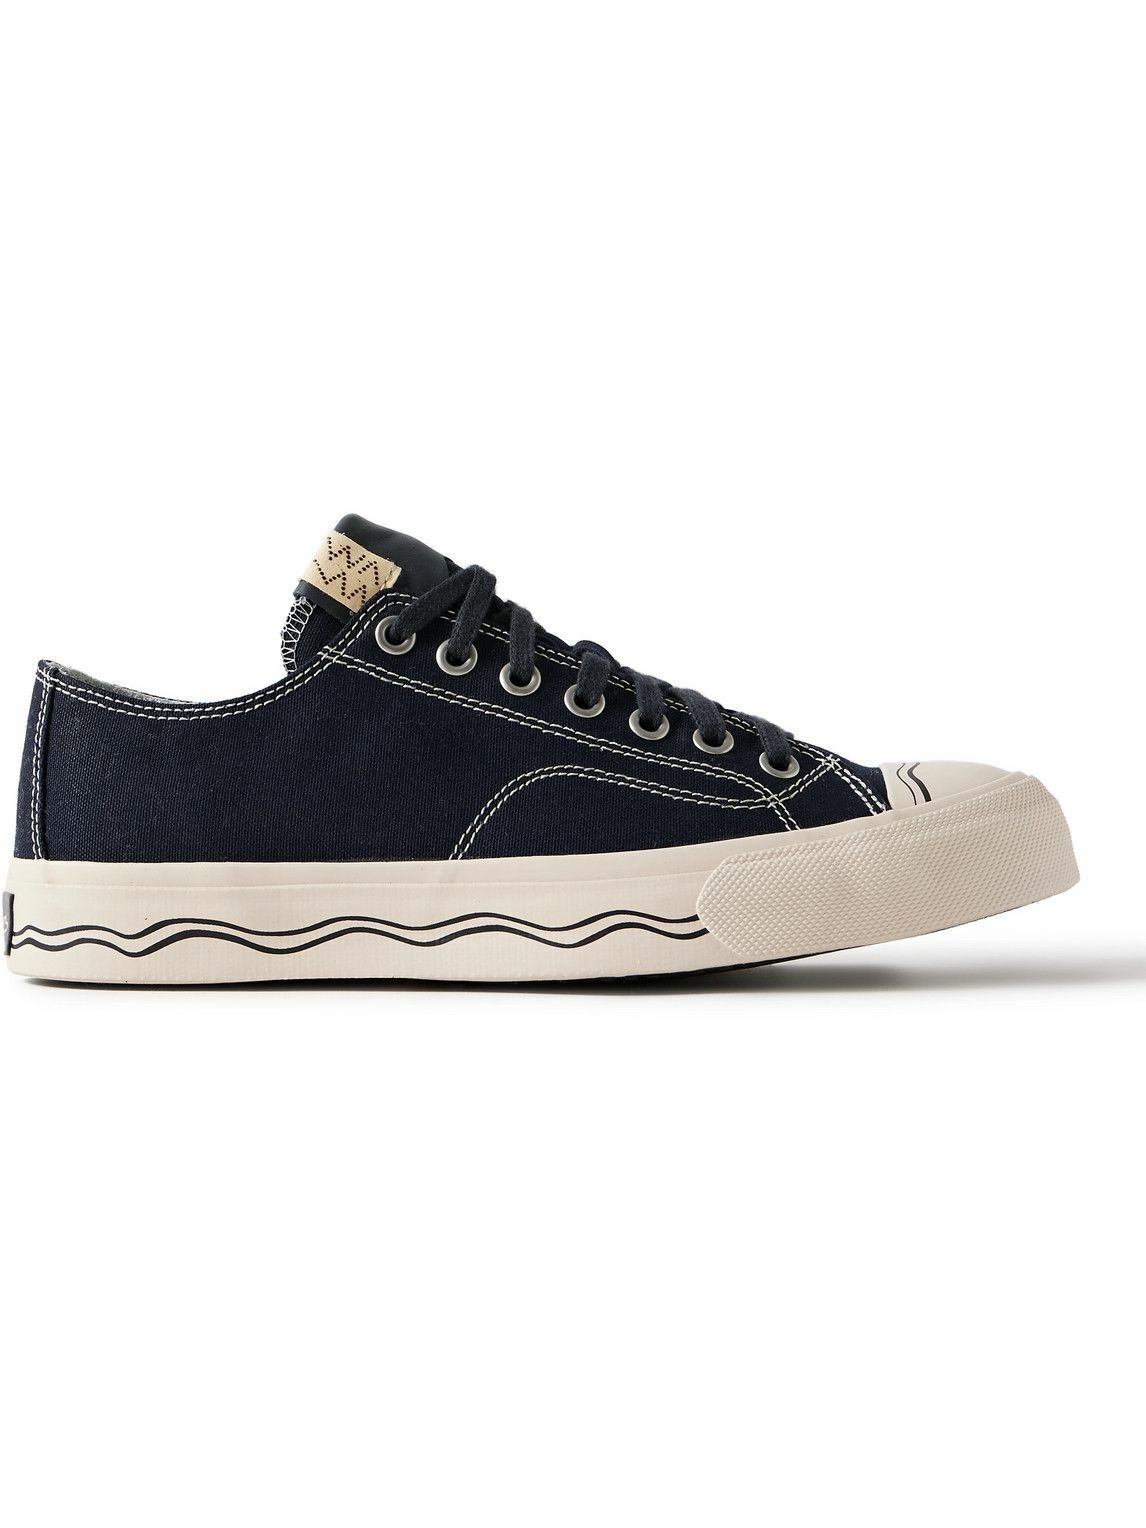 Visvim - Seeger Leather and Rubber-Trimmed Canvas Sneakers - Blue Visvim